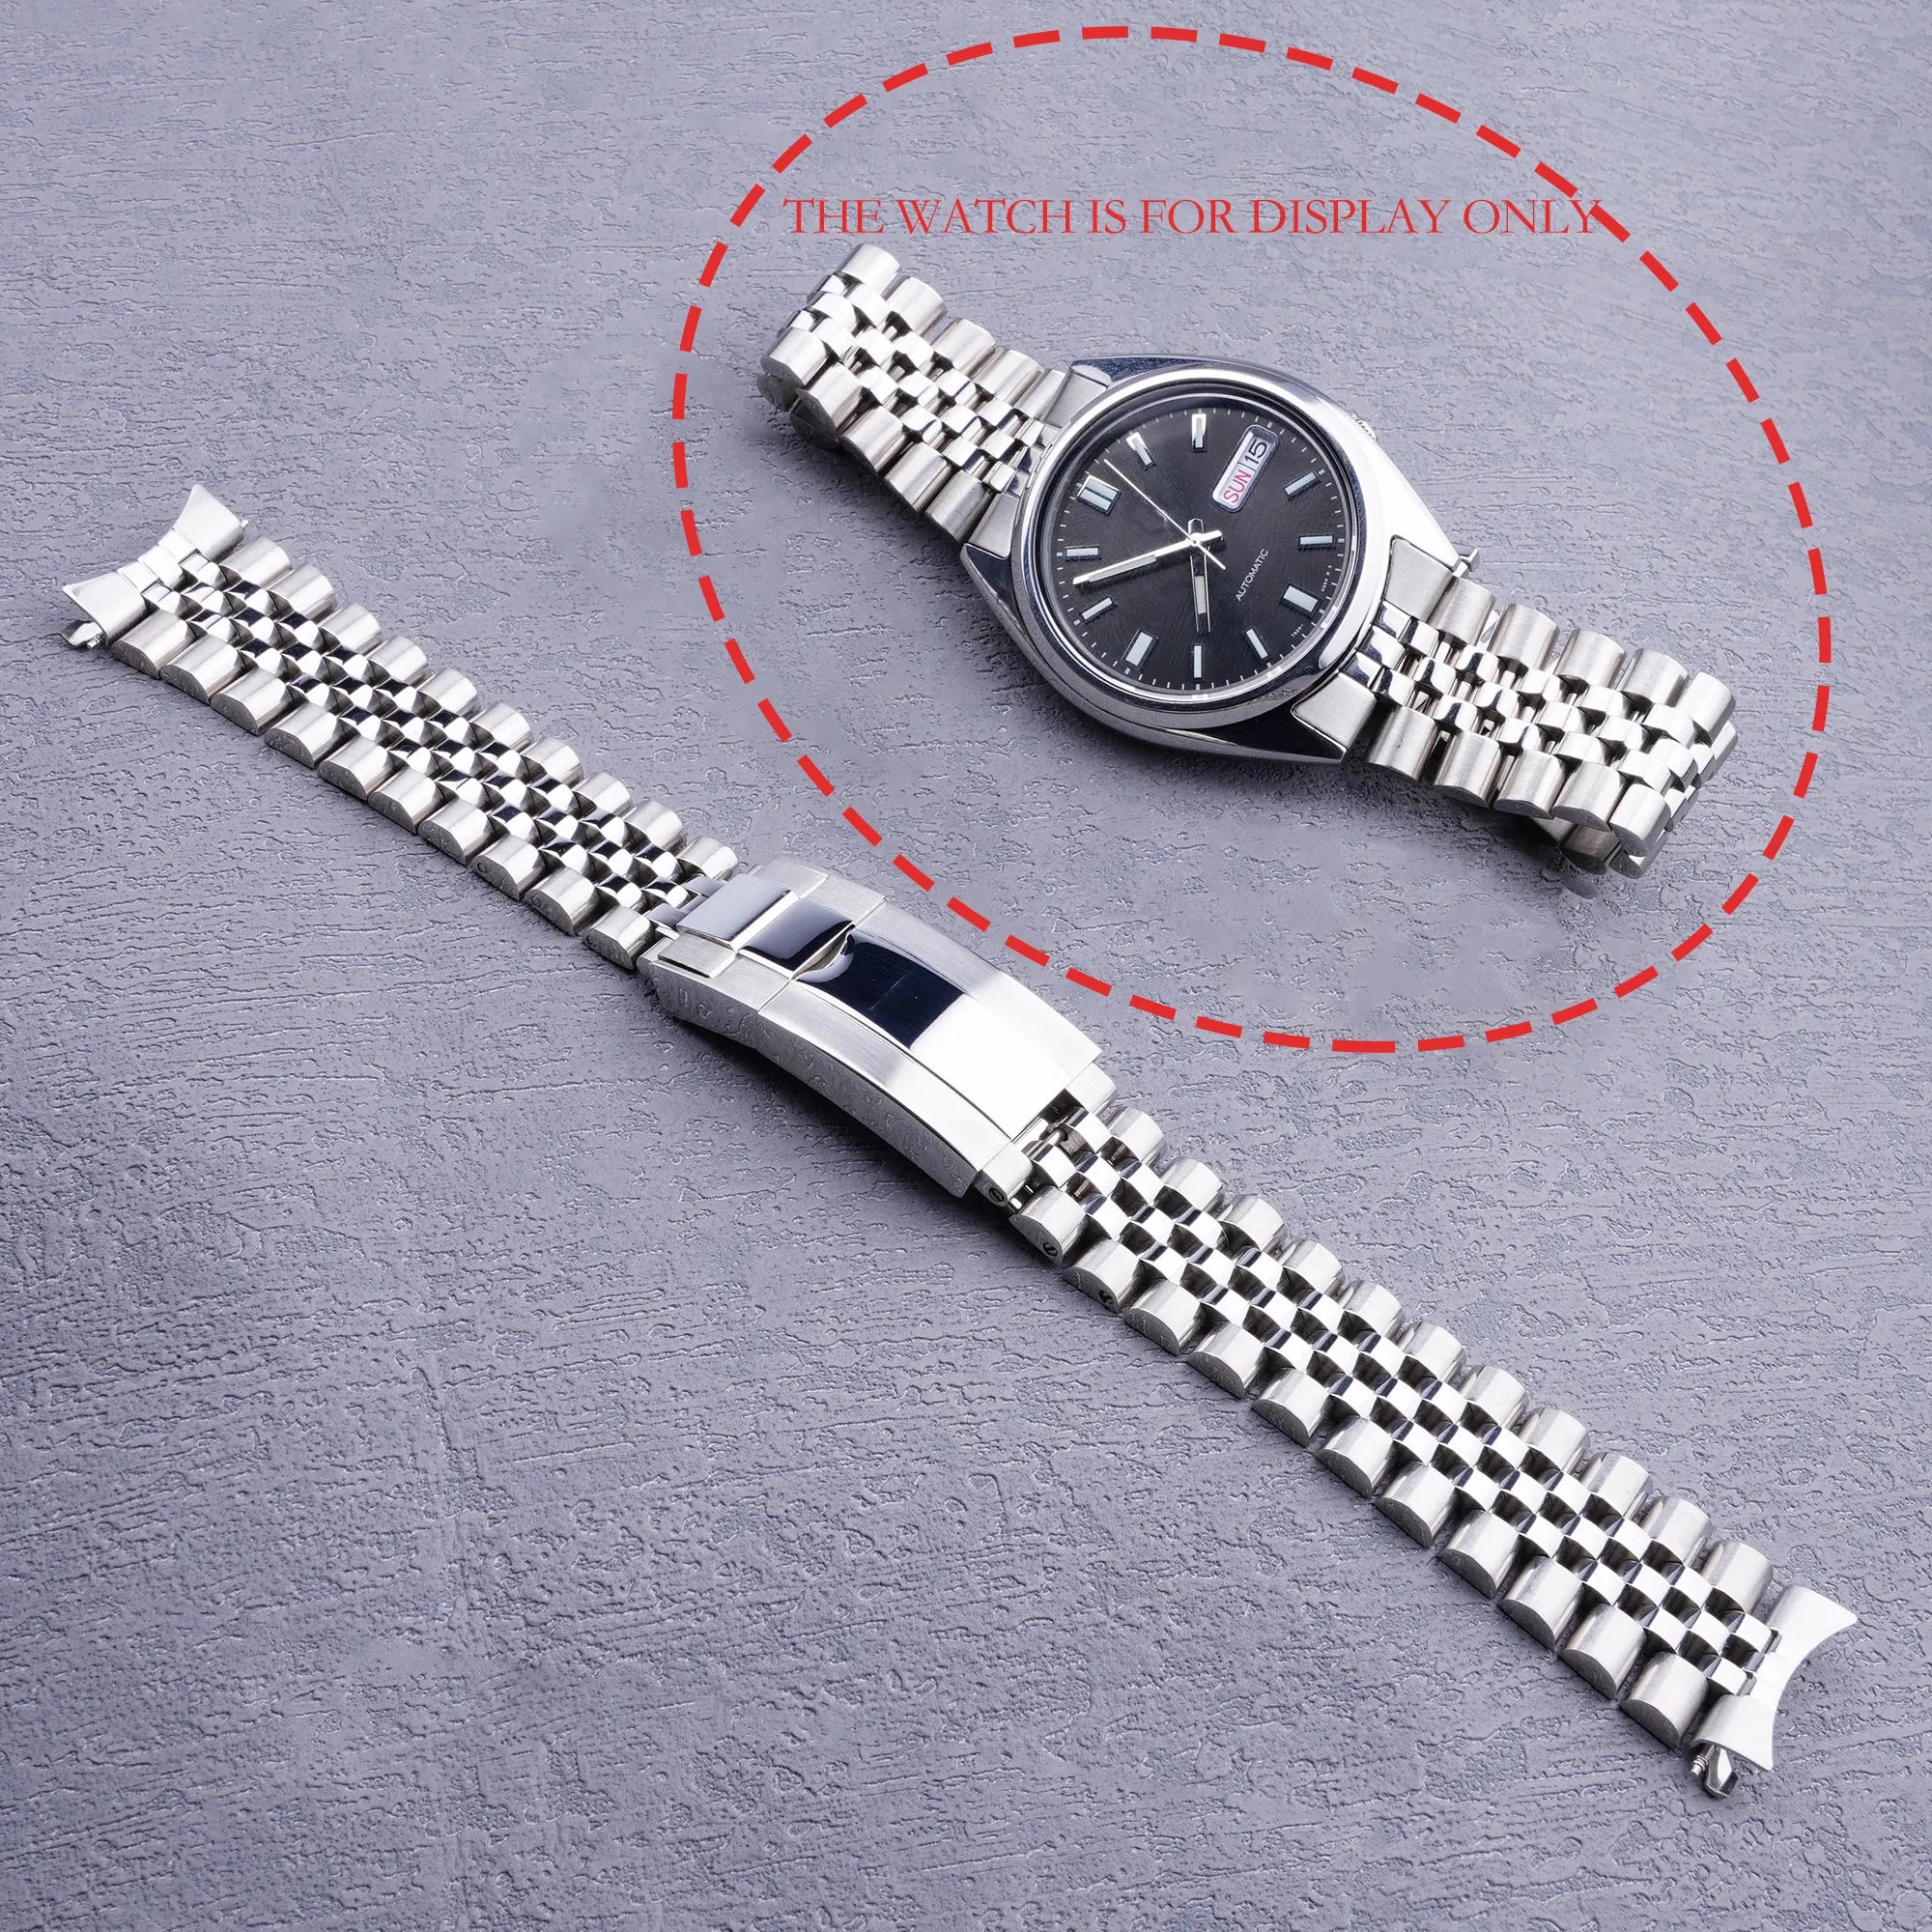 UFO 19mm Strap Bracelet FITS Chronograph Automatic 6138-0011 6138-0011  6138-0017 6138-7000 for Seiko Watches - Etsy